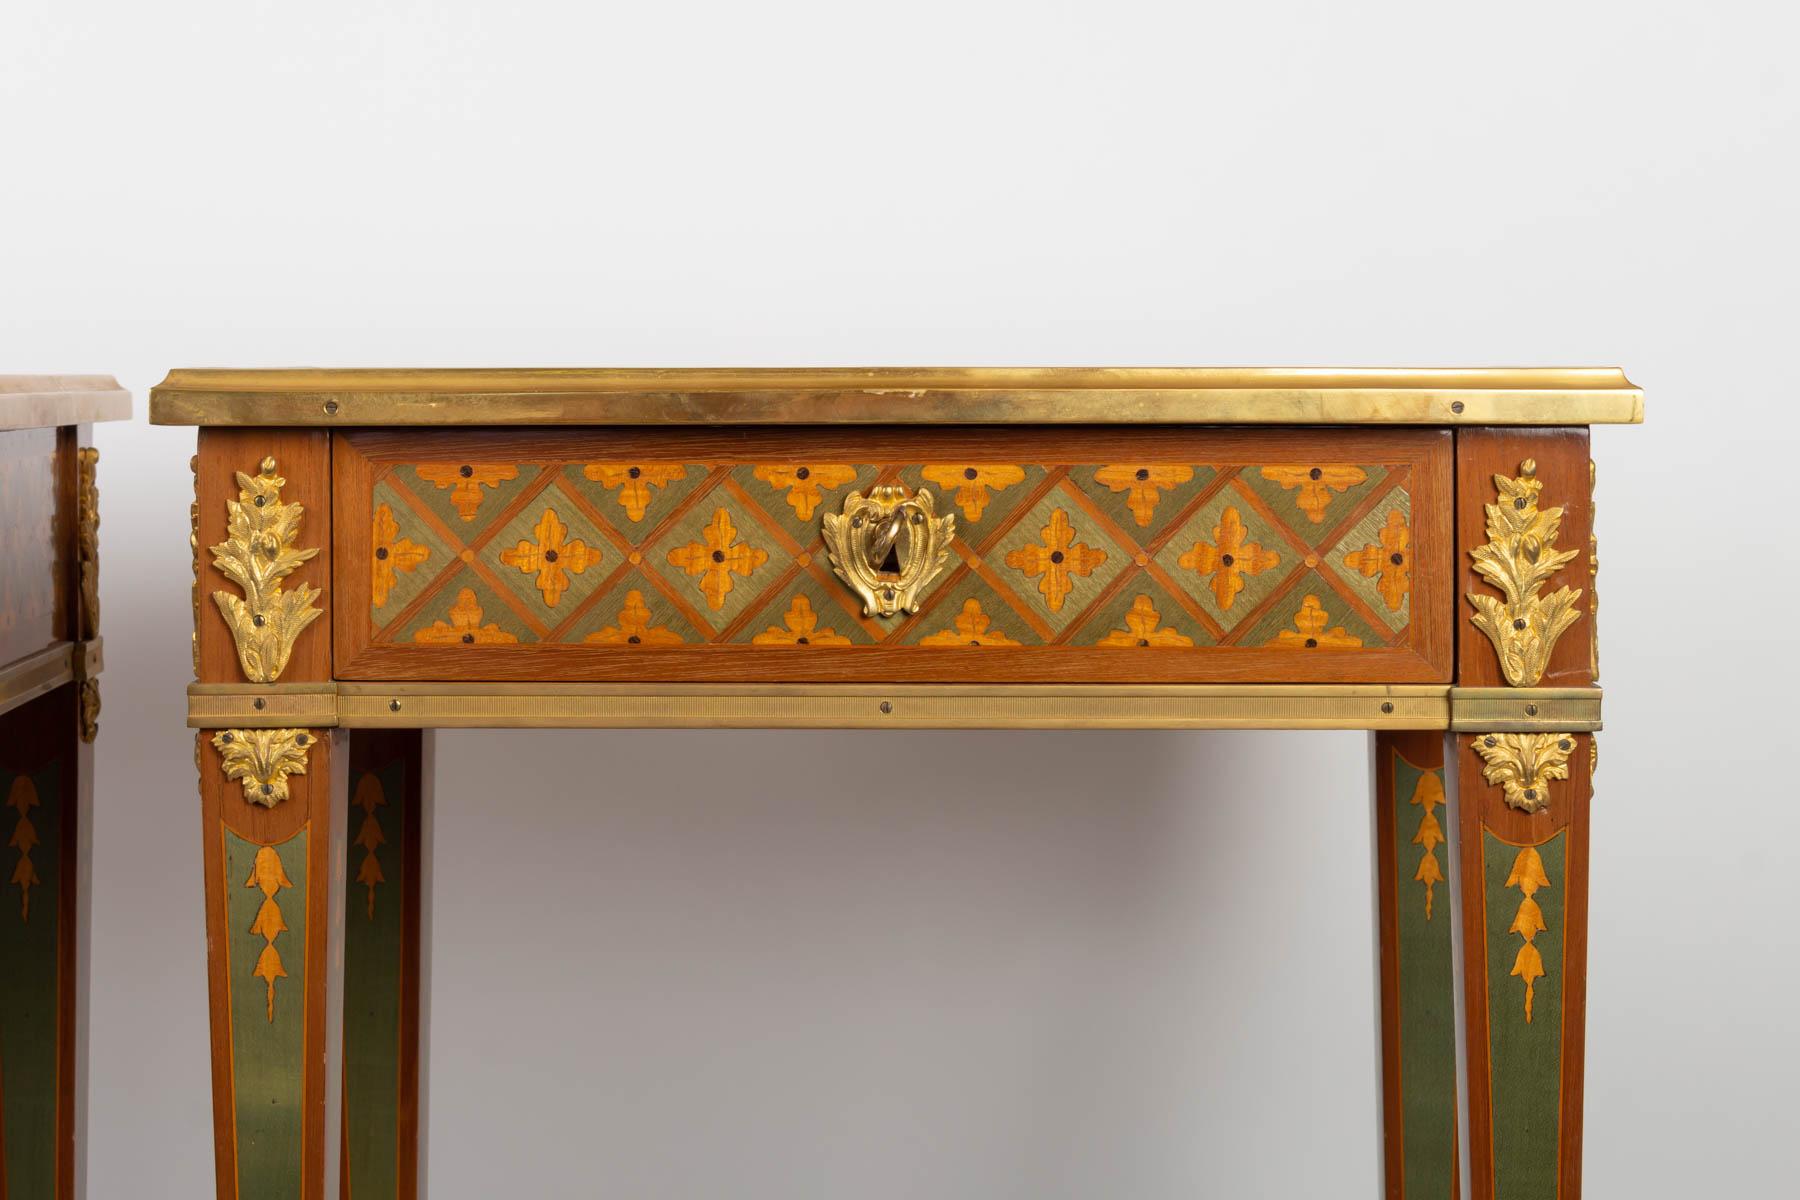 Pair of Louis XVI style consoles in precious wood and golden bronze marquetry

Measures: H 70cm, W 49cm, D 35cm.